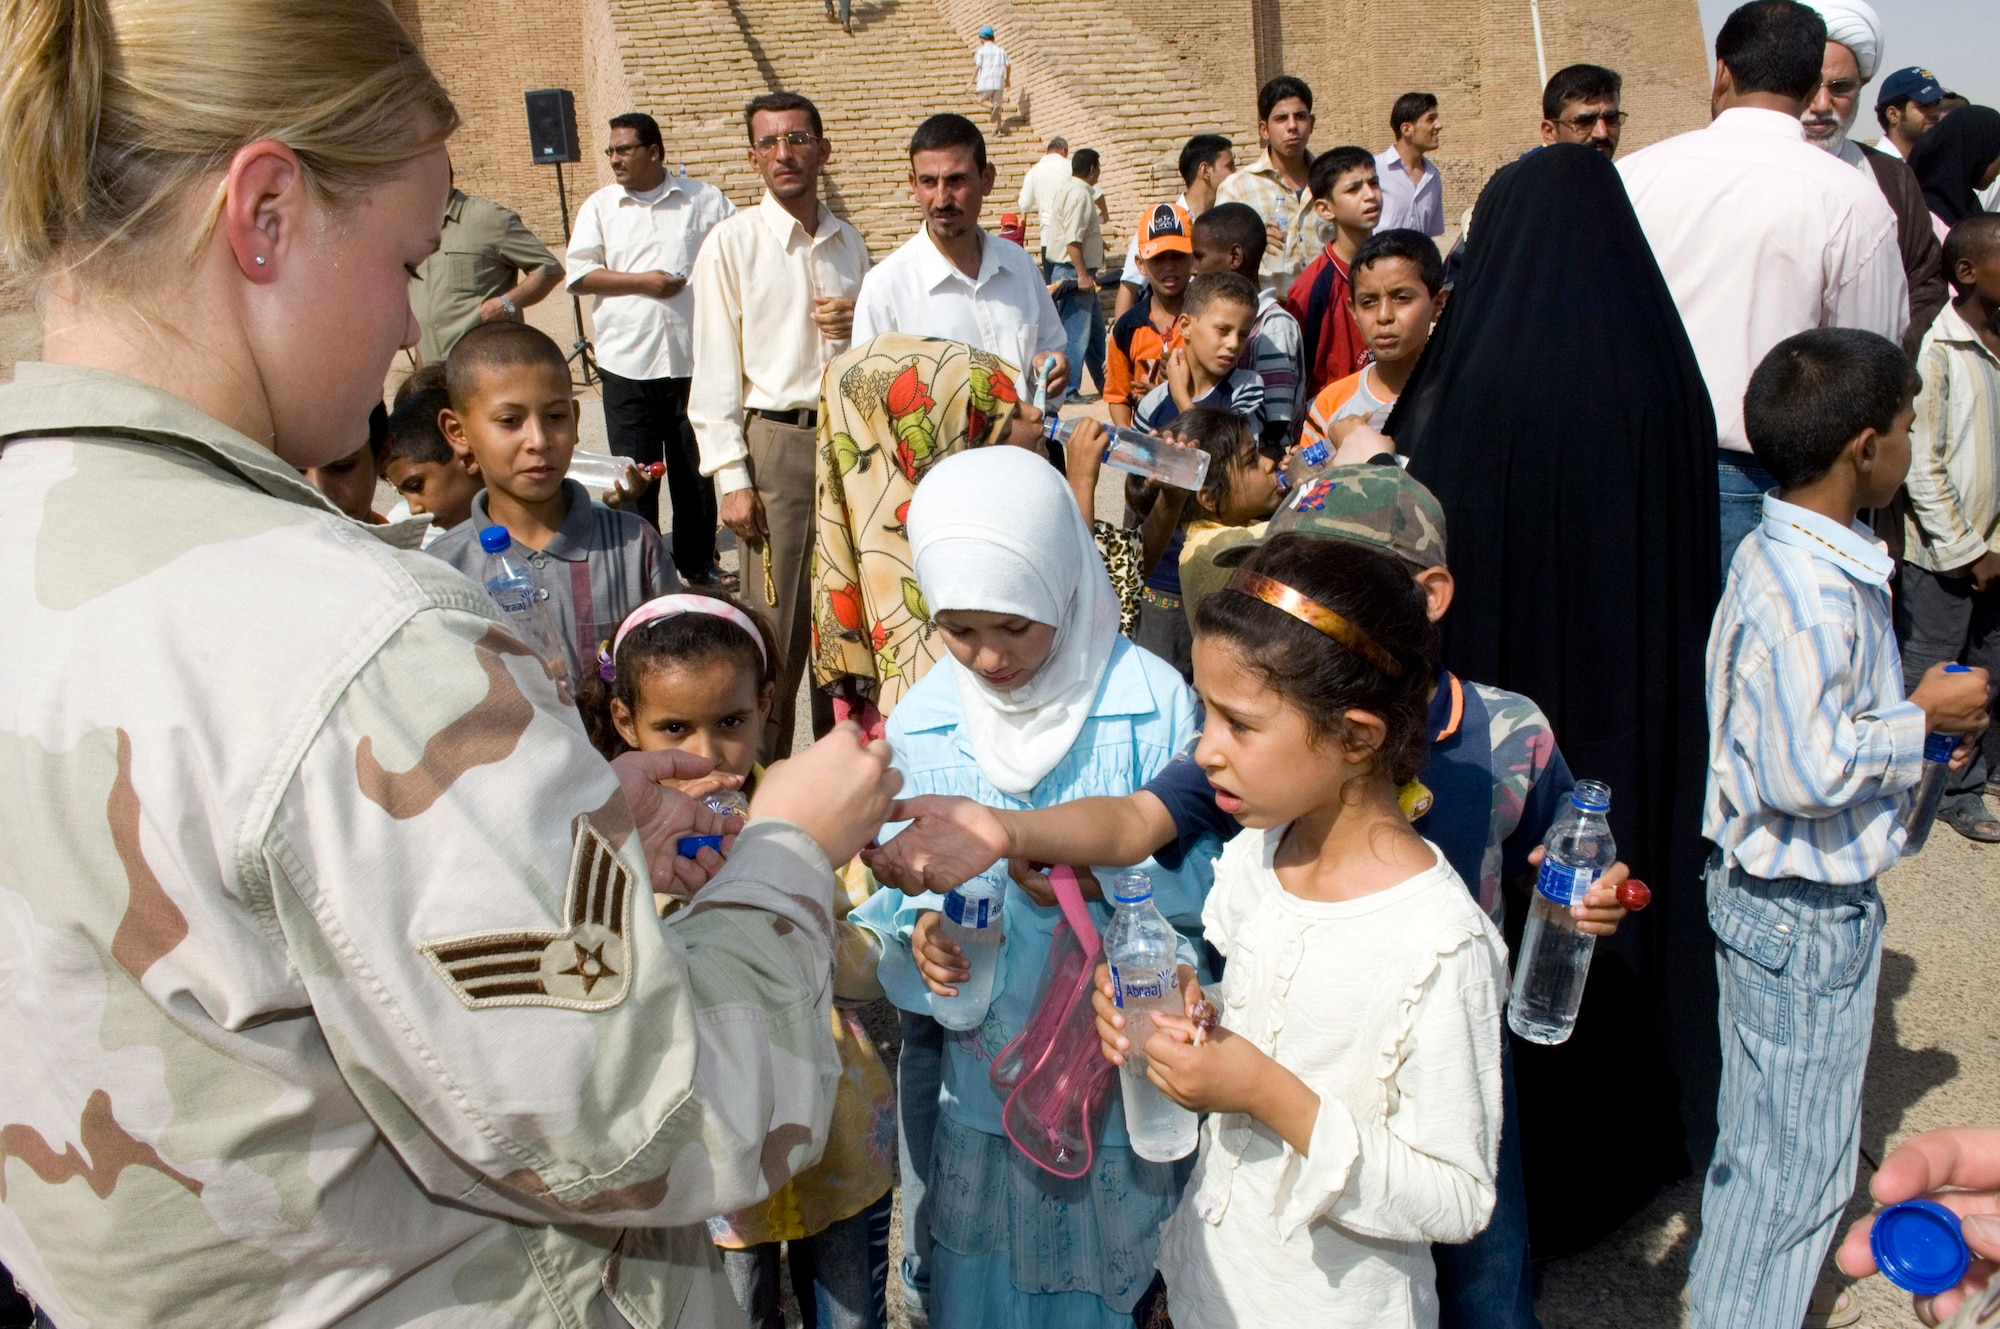 Senior Airman Ashley-Louise Jacobsen passes out candy to young Iraqi children during a visit by 80 Iraqi nationals to the historical Ziggurat Aug. 21 located on Ali Base, Iraq. The Ali First Four Council sponsored the visit. This is the first time in more than 10 years that Iraqi civilians have been allowed to step on the grounds of the historical site, which was built in the ancient city of Ur and includes the house of the biblical prophet Abraham. Airman Jacobsen is a member of the 407th Expeditionary Logistics Readiness Squadron at Ali Base. (U.S. Air Force photo/Master Sgt. Robert W. Valenca) 
